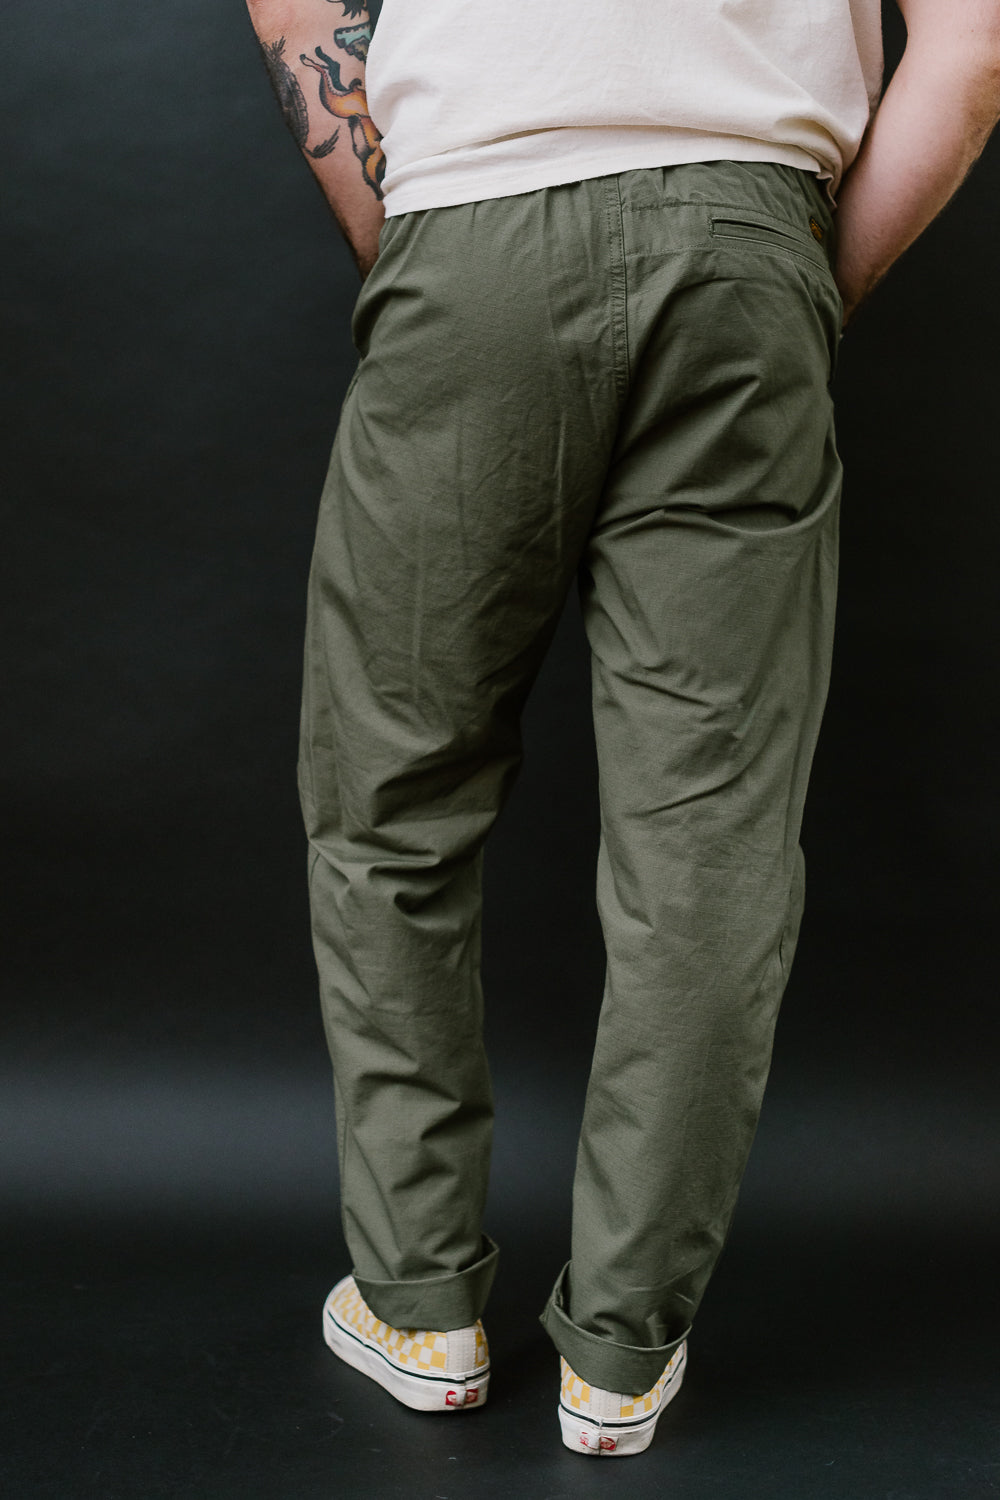 03-1002-76 - New Yorker Pant - Olive Ripstop